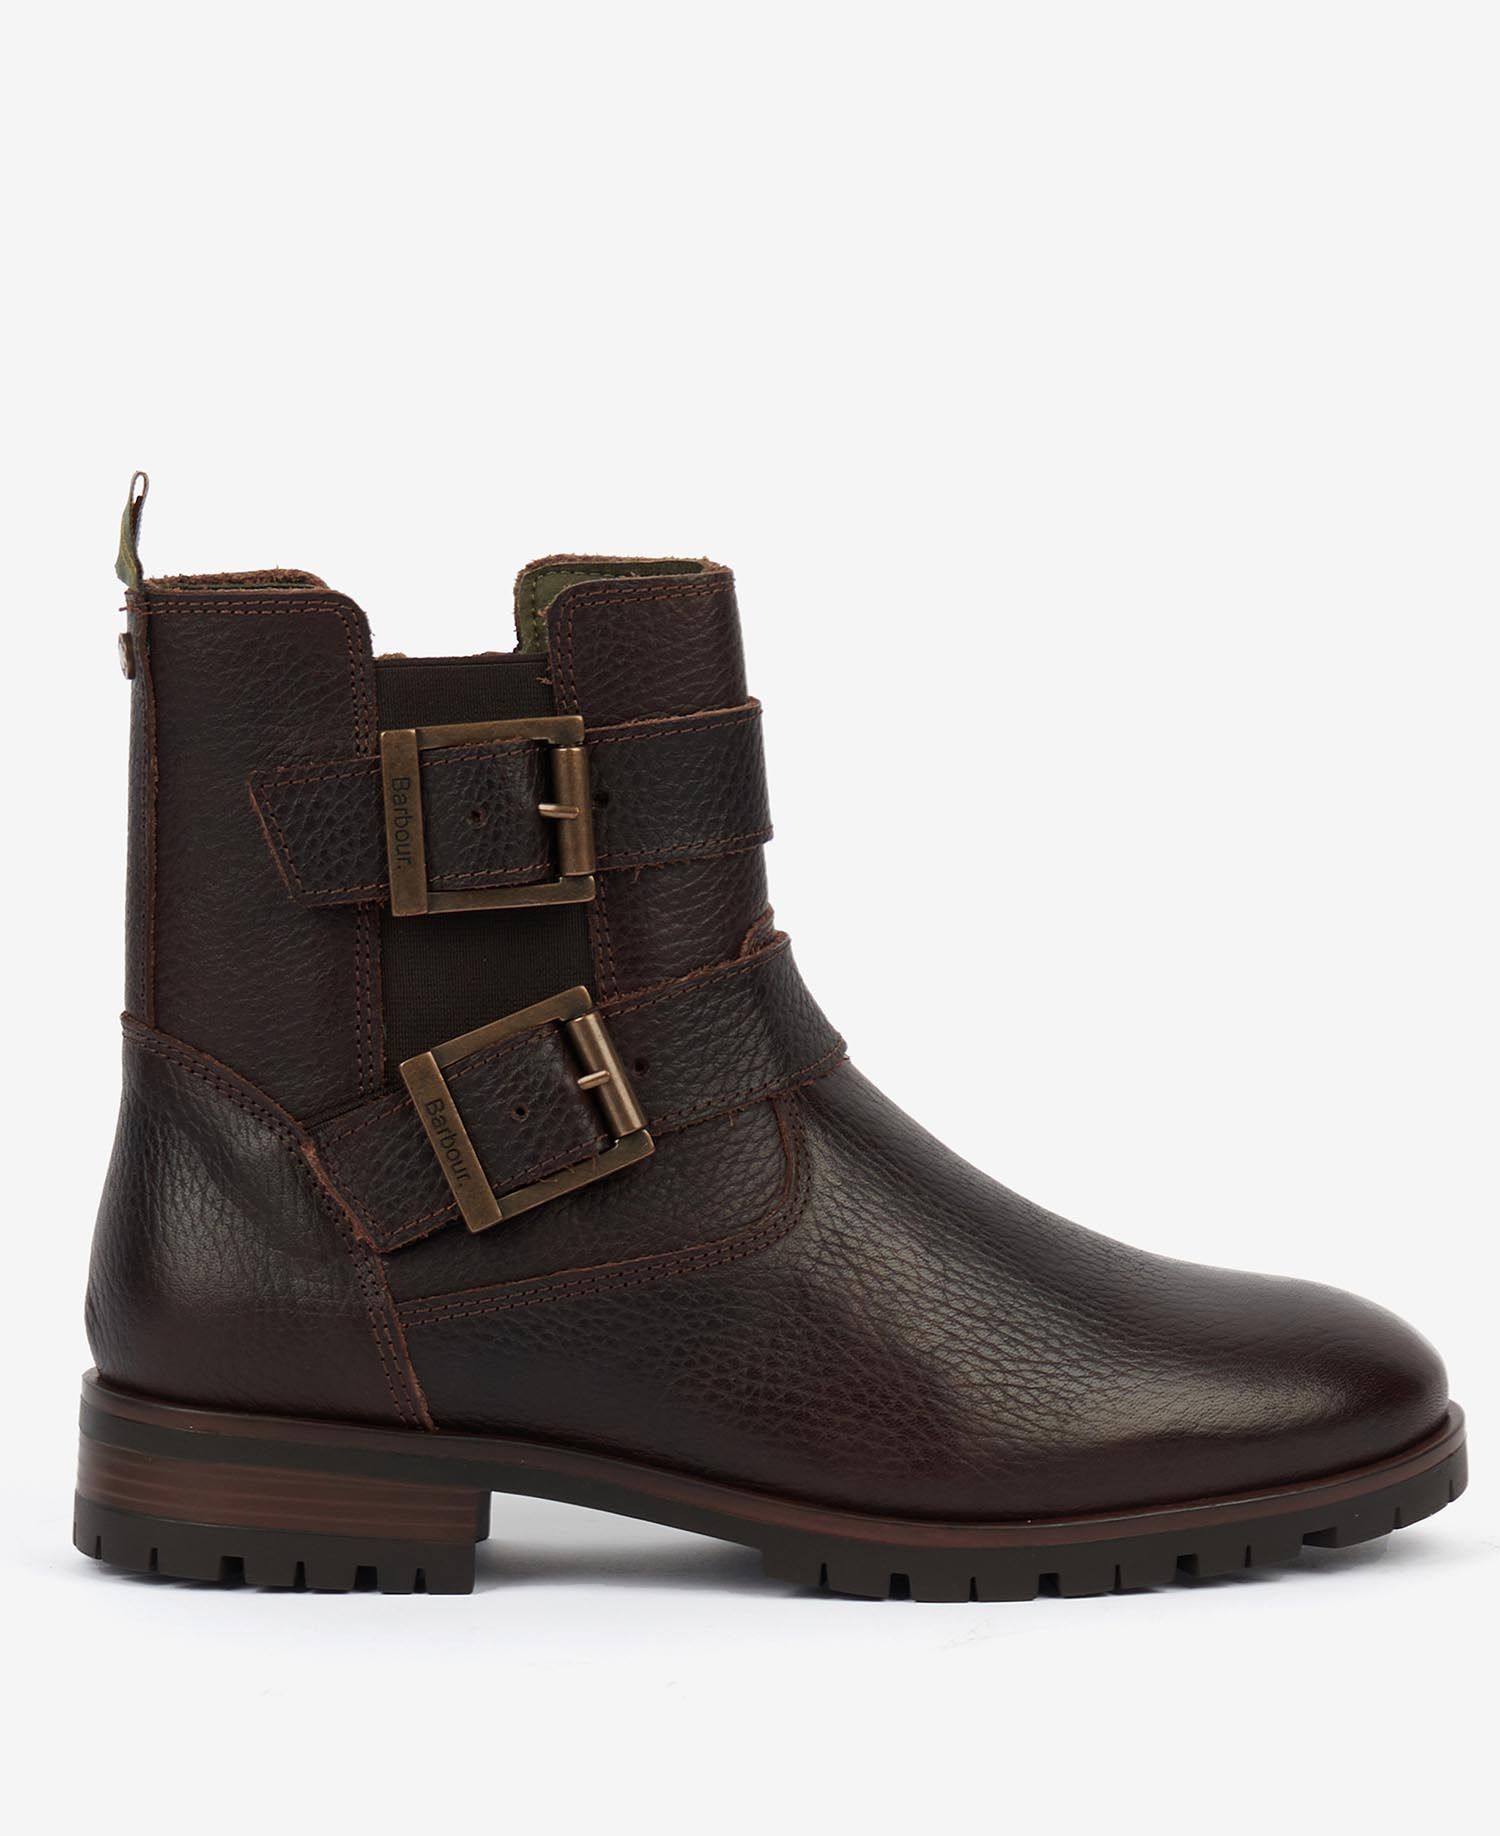 Barbour Marina Boots